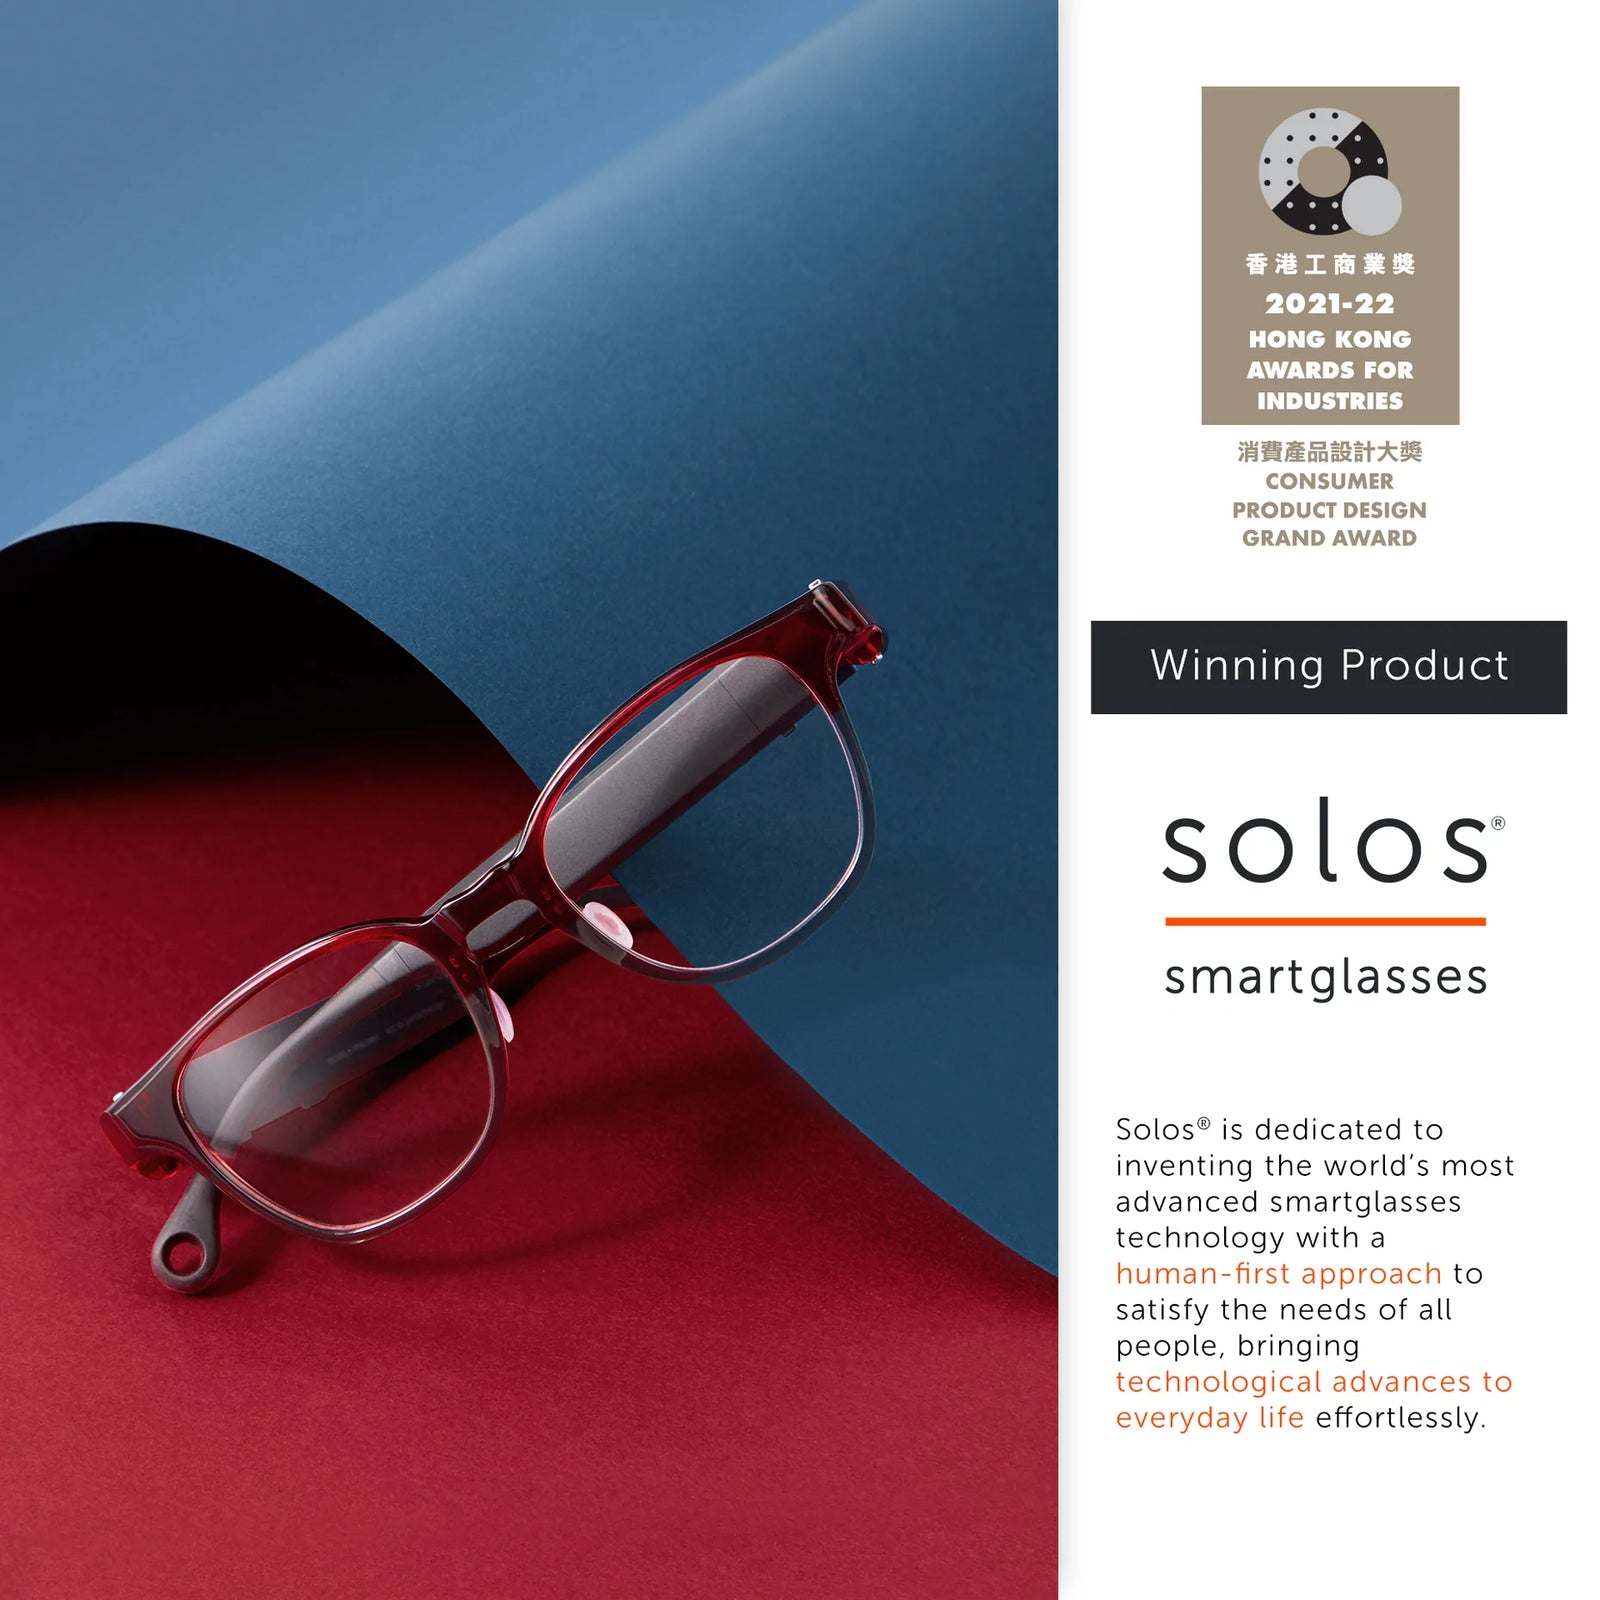 SOLOS® SMARTGLASSES SECURES GRAND AWARD FROM HONG KONG AWARDS OF INDUSTRIES SOLOS SMARTGLASSES EARNS TOP RECOGNITION FOR CONSUMER PRODUCT DESIGN - Solos Technology Limited